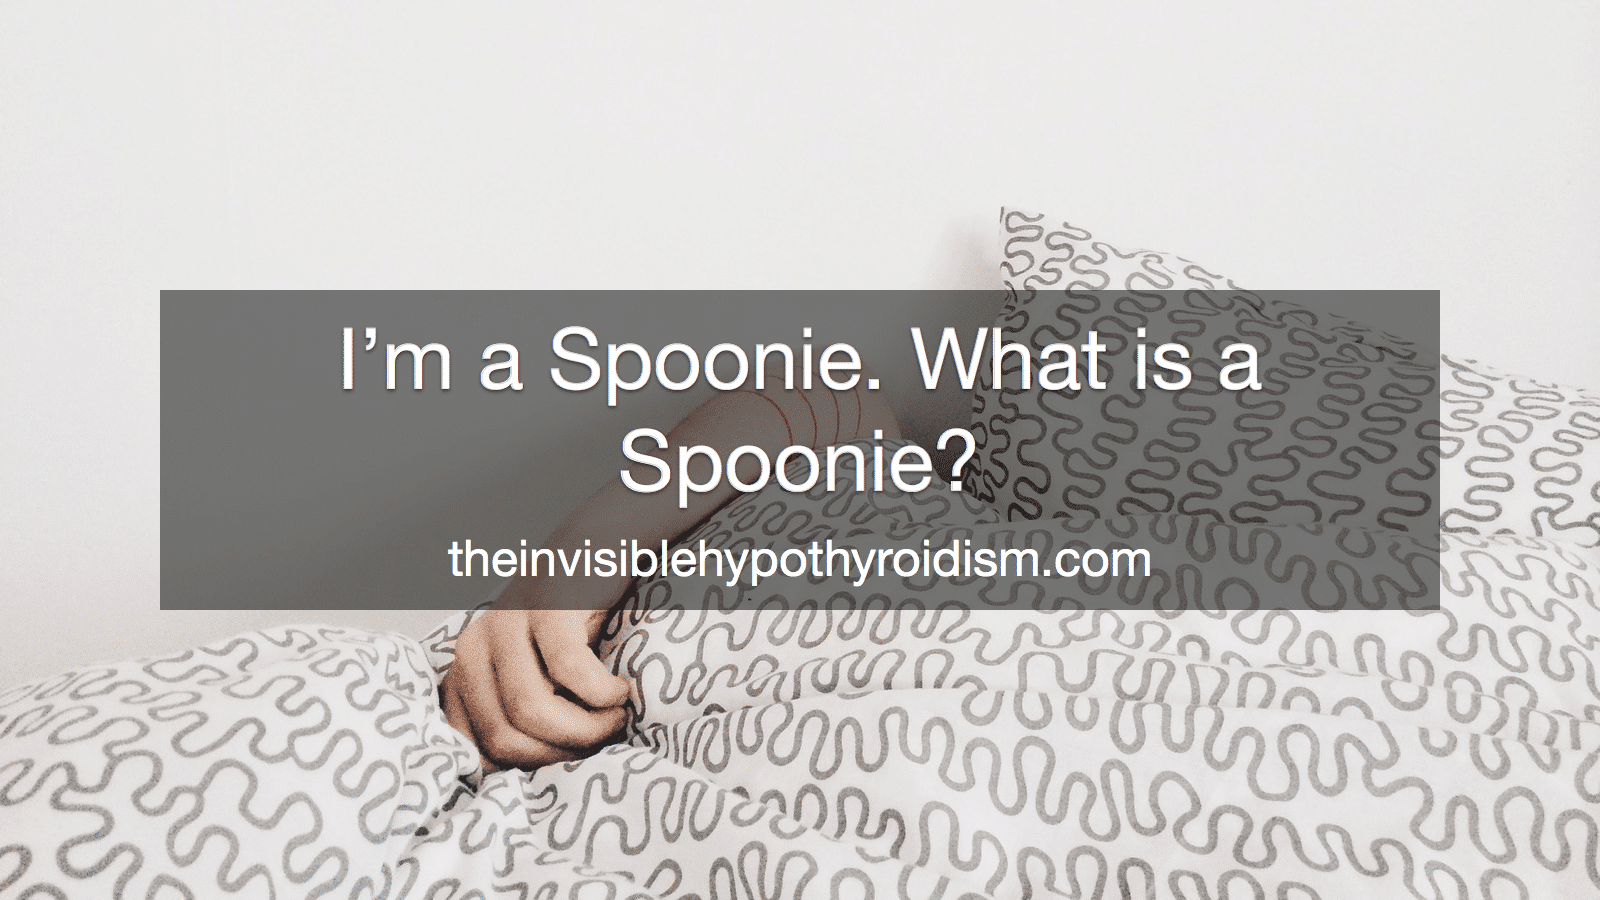 I'm a Spoonie. What is a Spoonie?